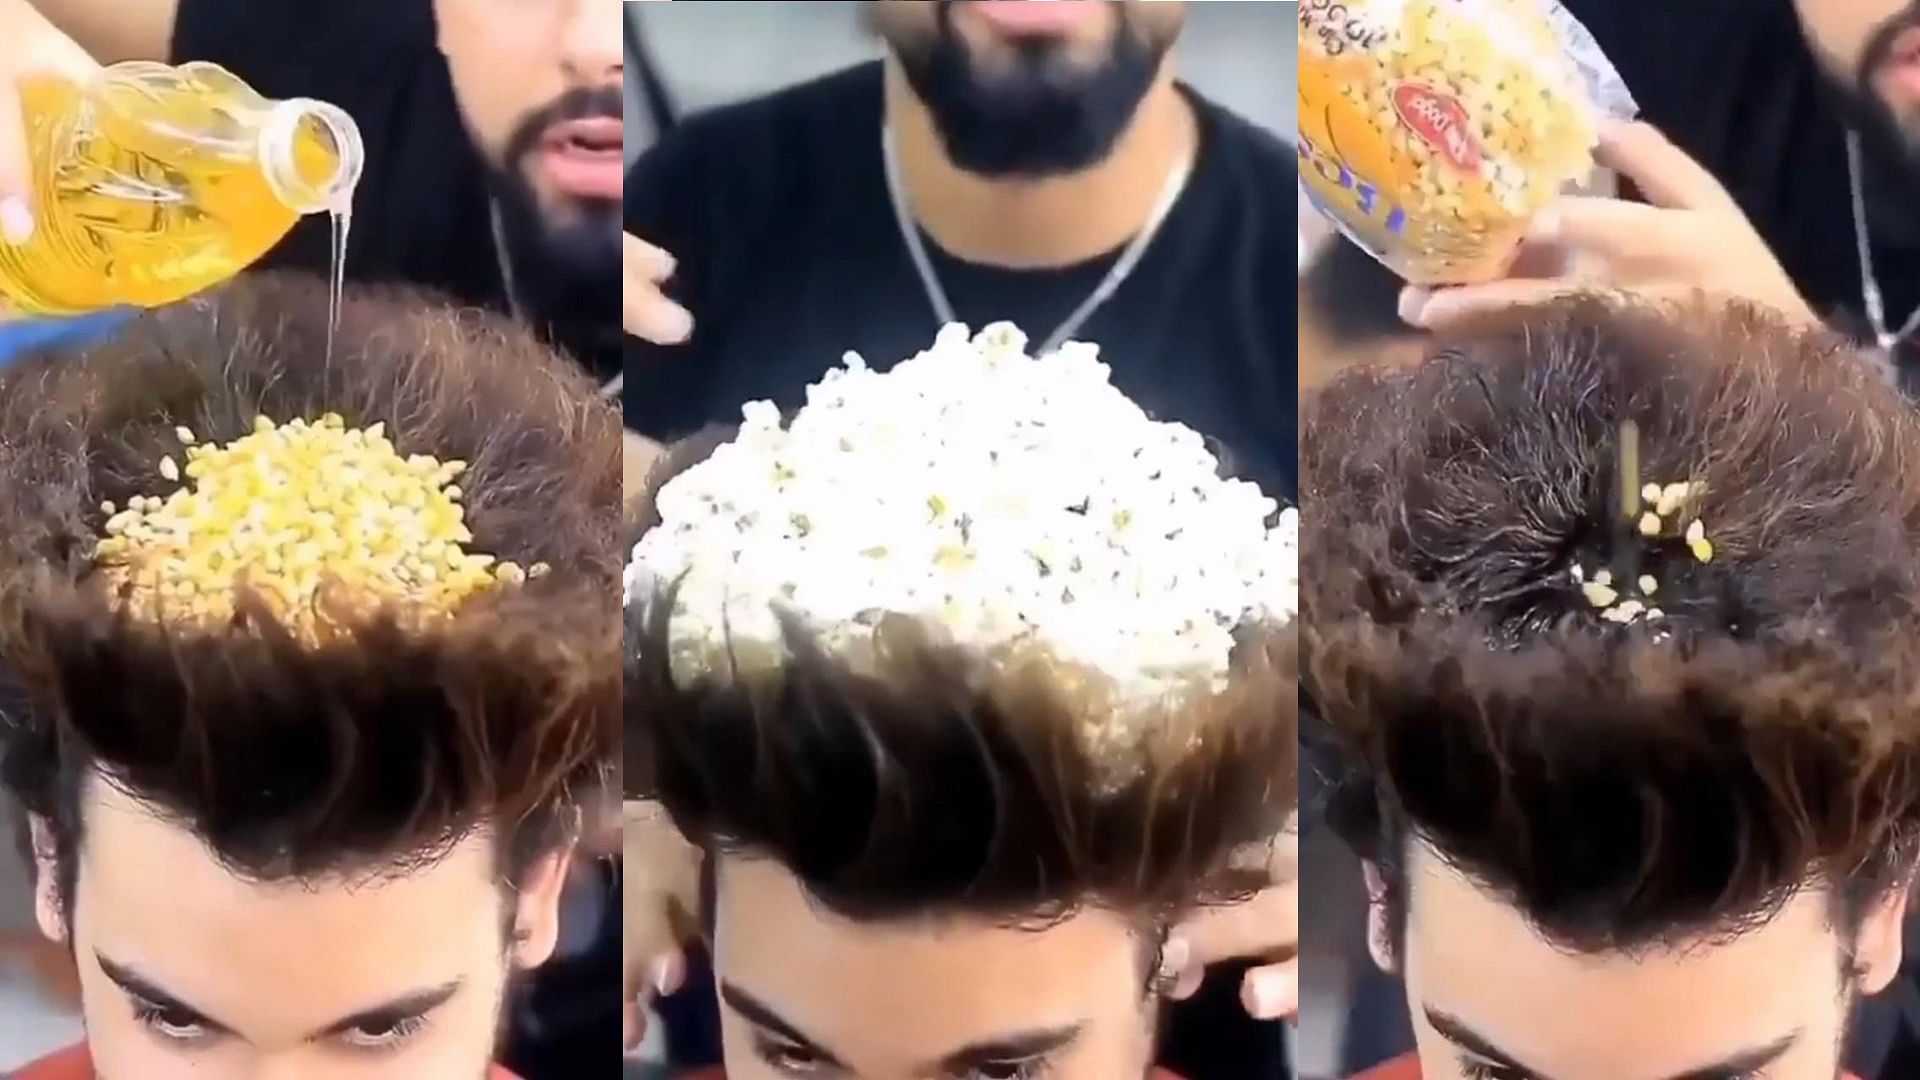 How to make popcorn on head tutorial Popcorn made on the mans head in the salon